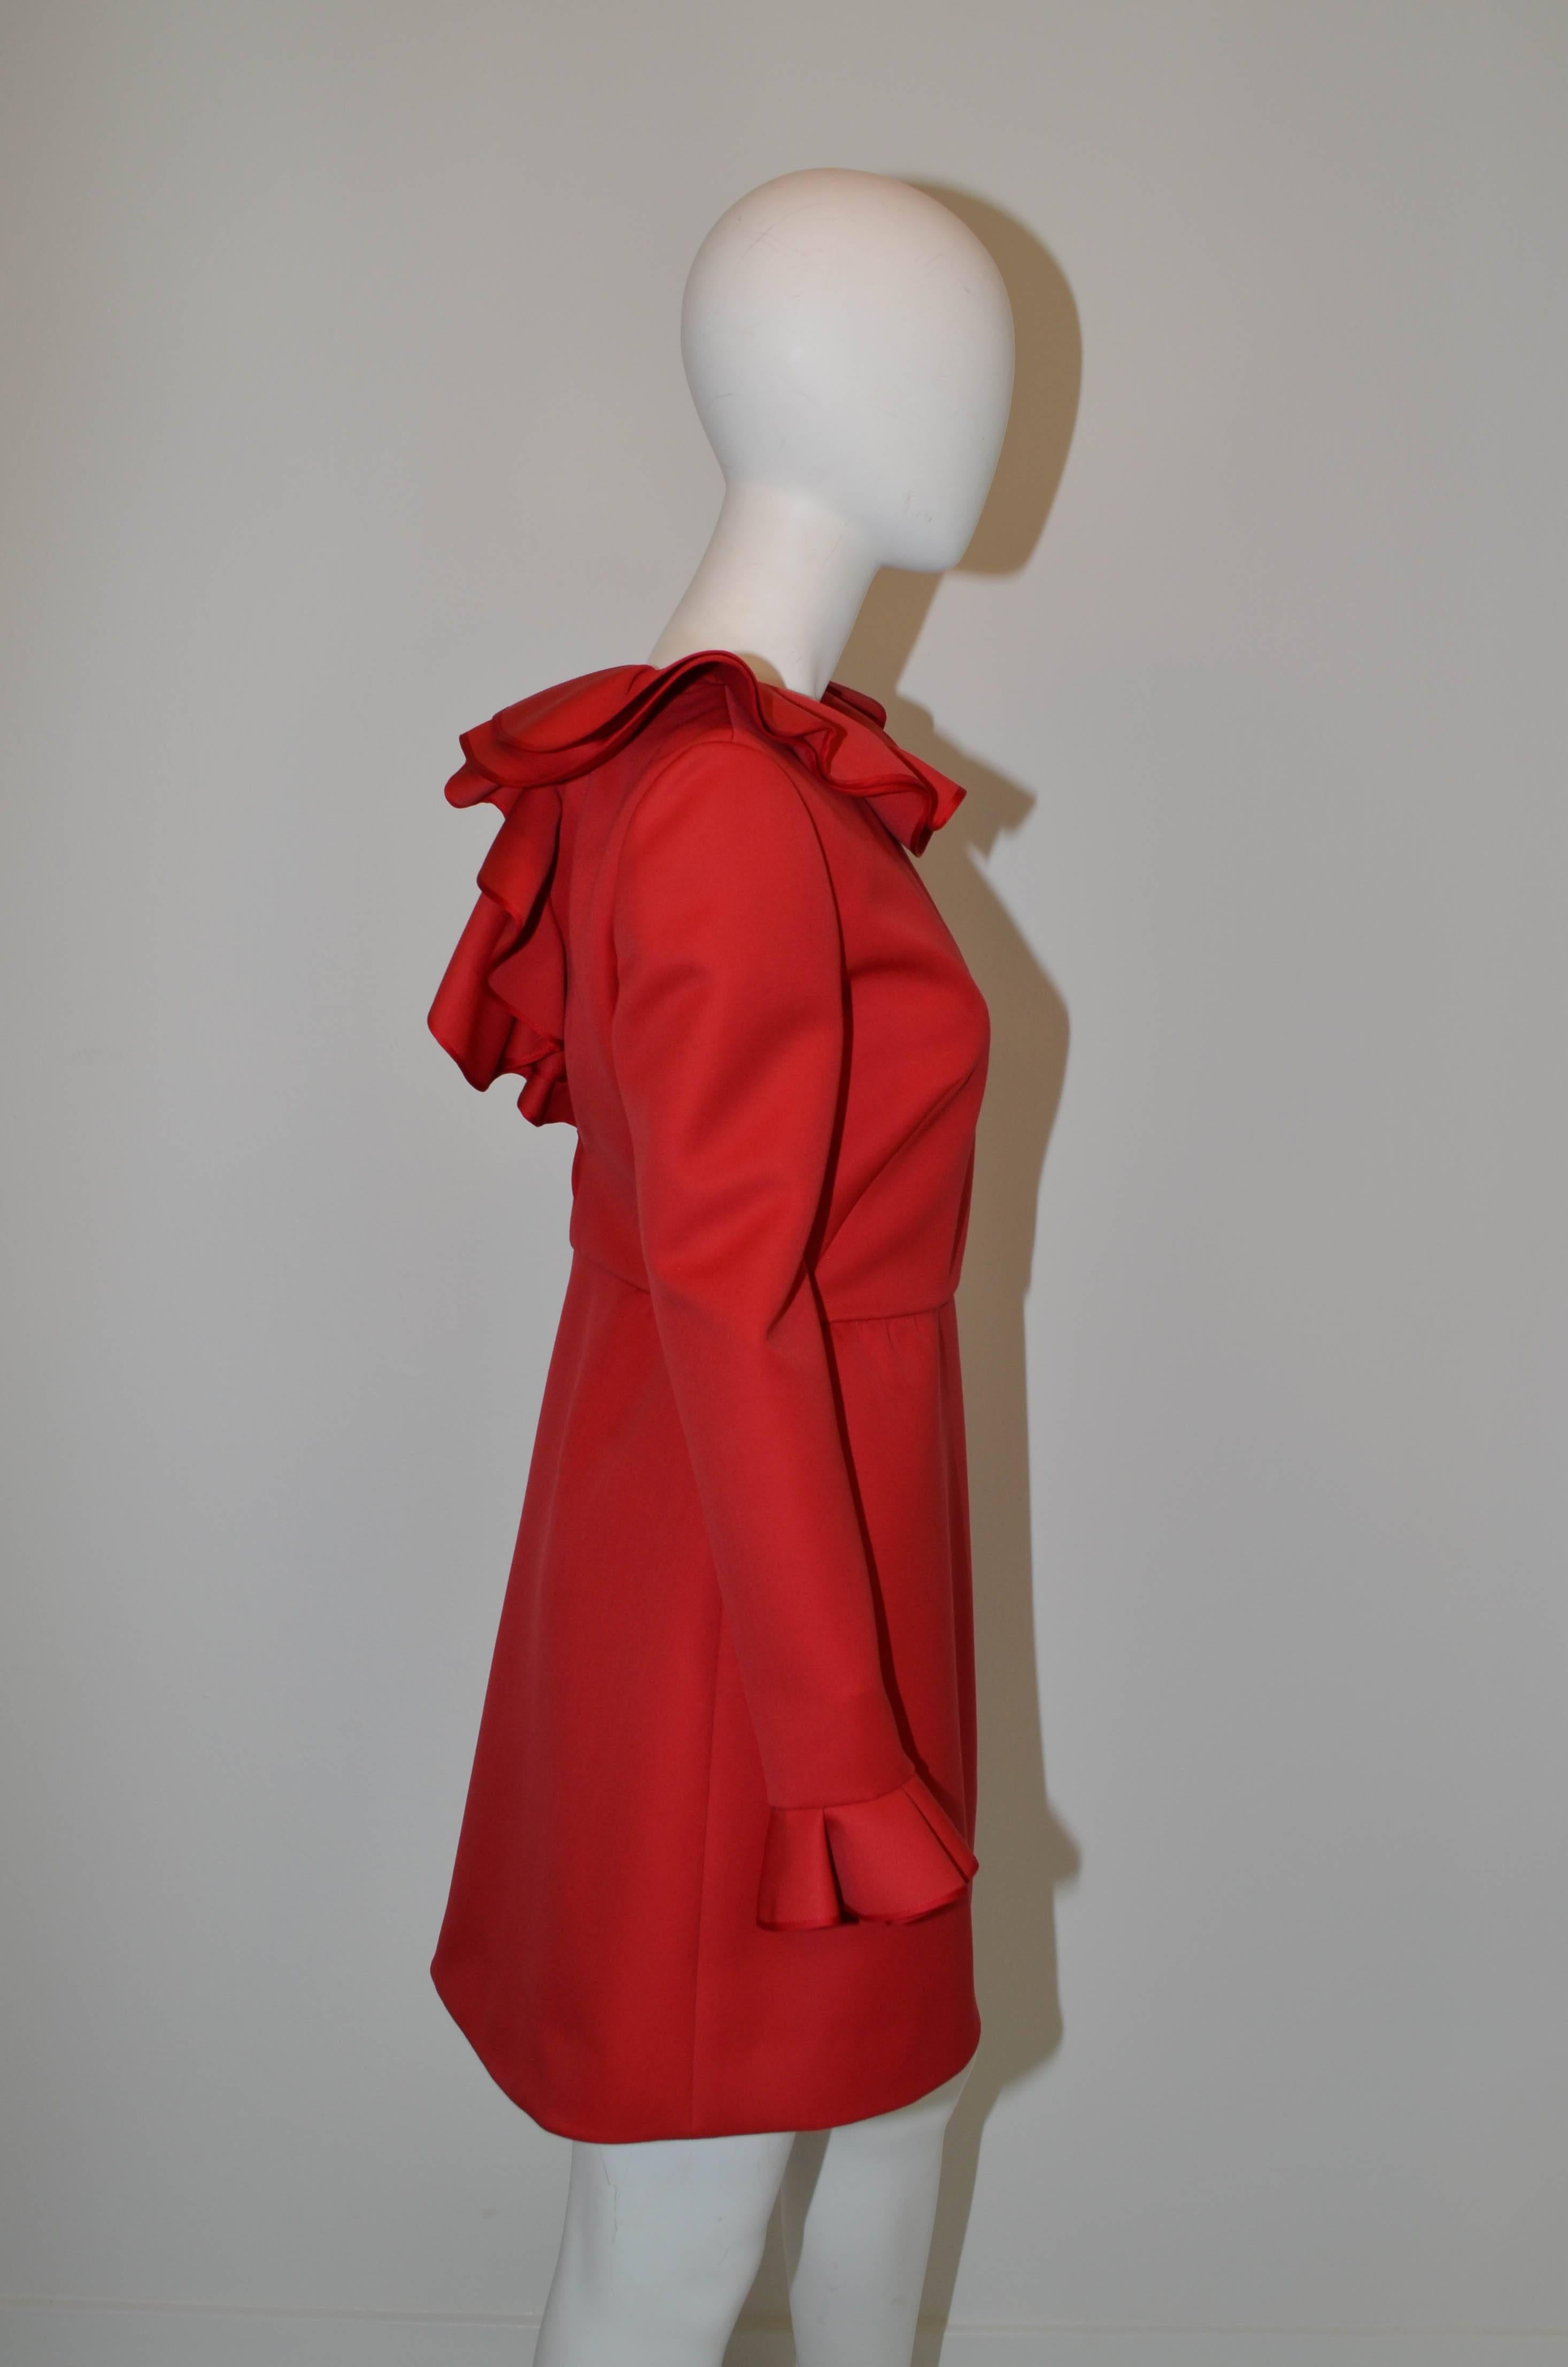 Beautiful structured wool Valentino ruffle dress in classic signature red, featuring a ruffled neckline and sleeve. This dress is from recent collection and is in excellent condition. Made in Italy. Marked size 8.
Measurements: 
Bust 34
Waist